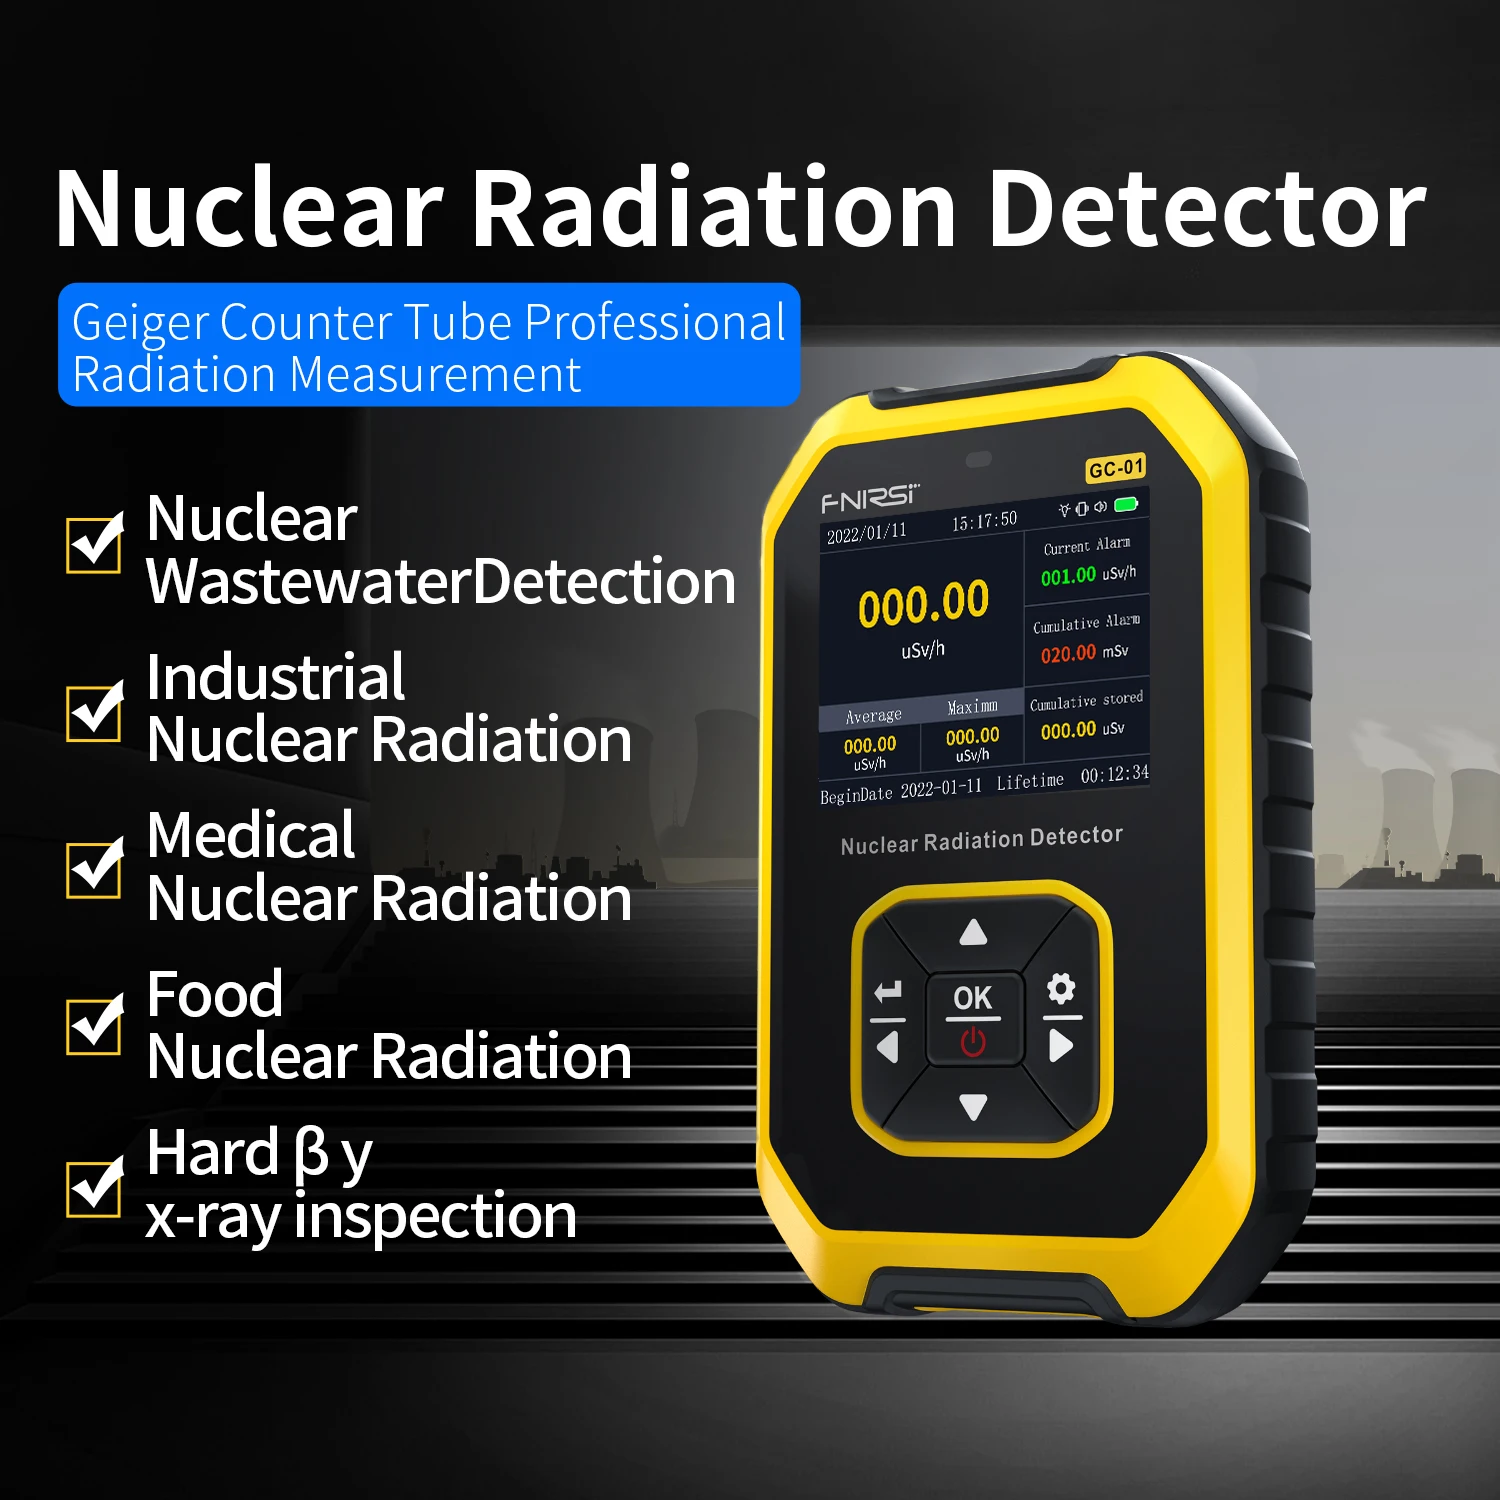 GC01 Nuclear Radiation Detector Professional Marble Radiation Ionization Personal Dose Alarm Geiger counter Radioactive Tester